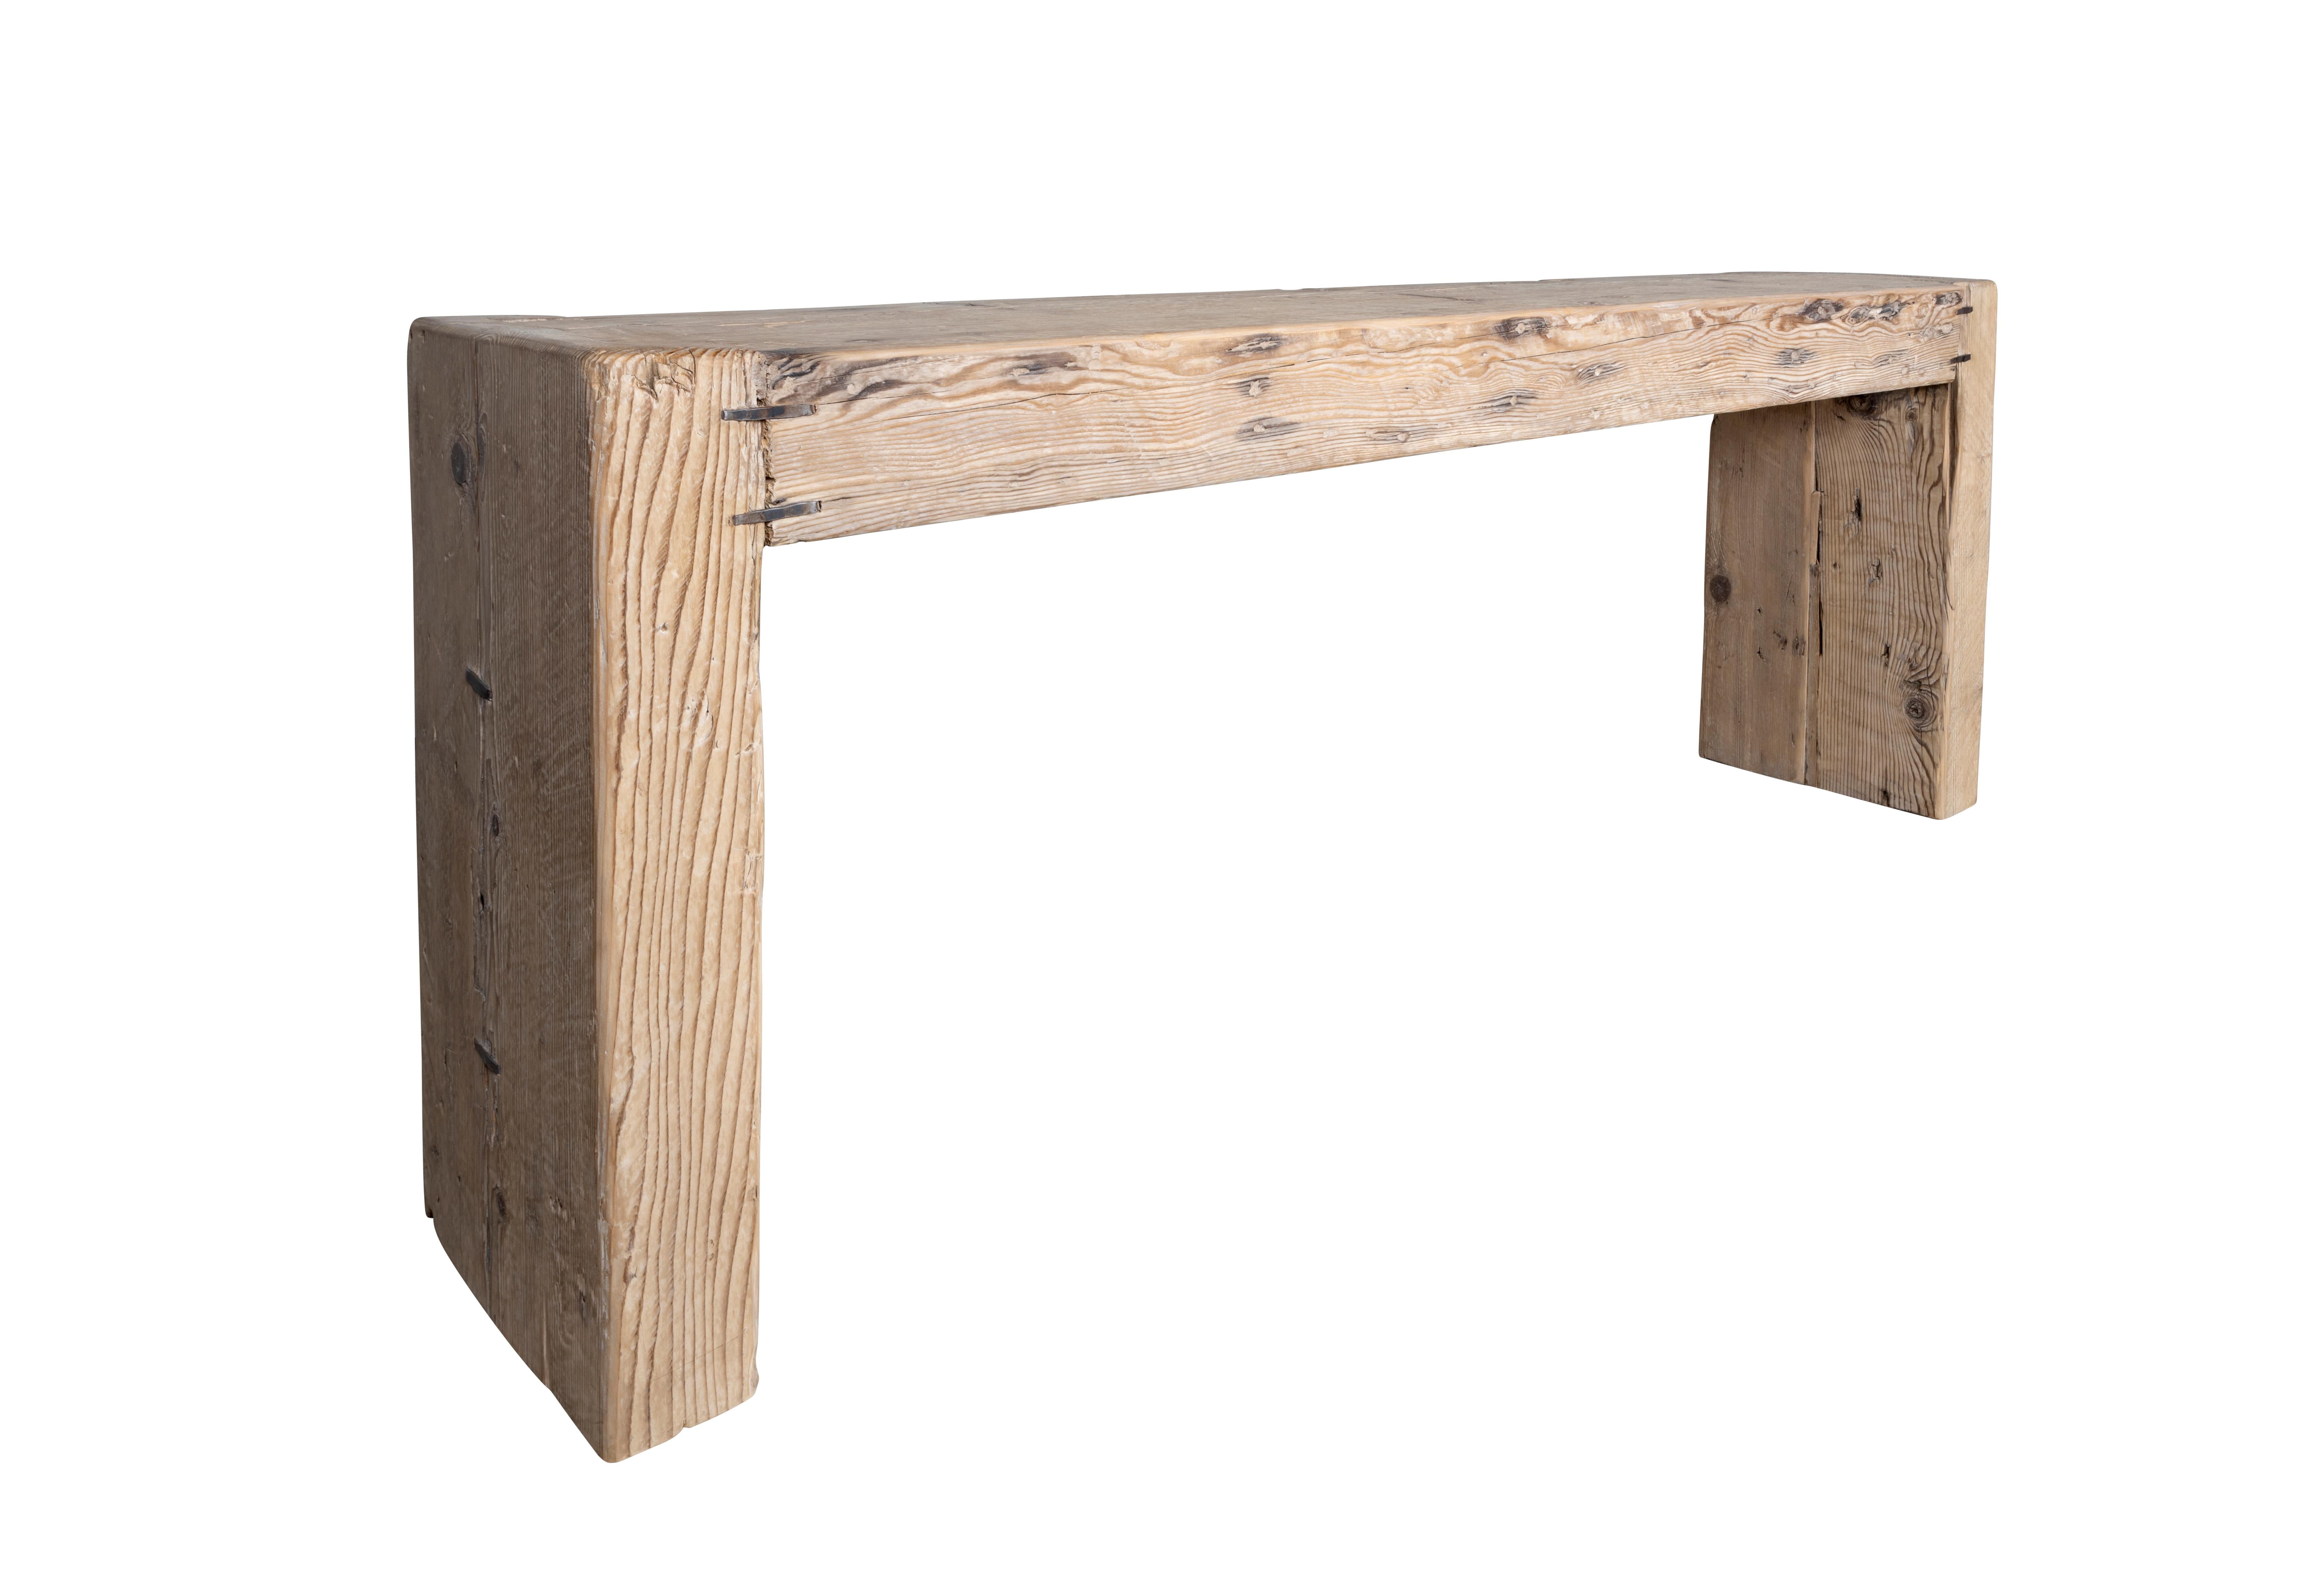 Minimalist Provincial Serving Table in Reclaimed Elm In Good Condition For Sale In Dallas, TX